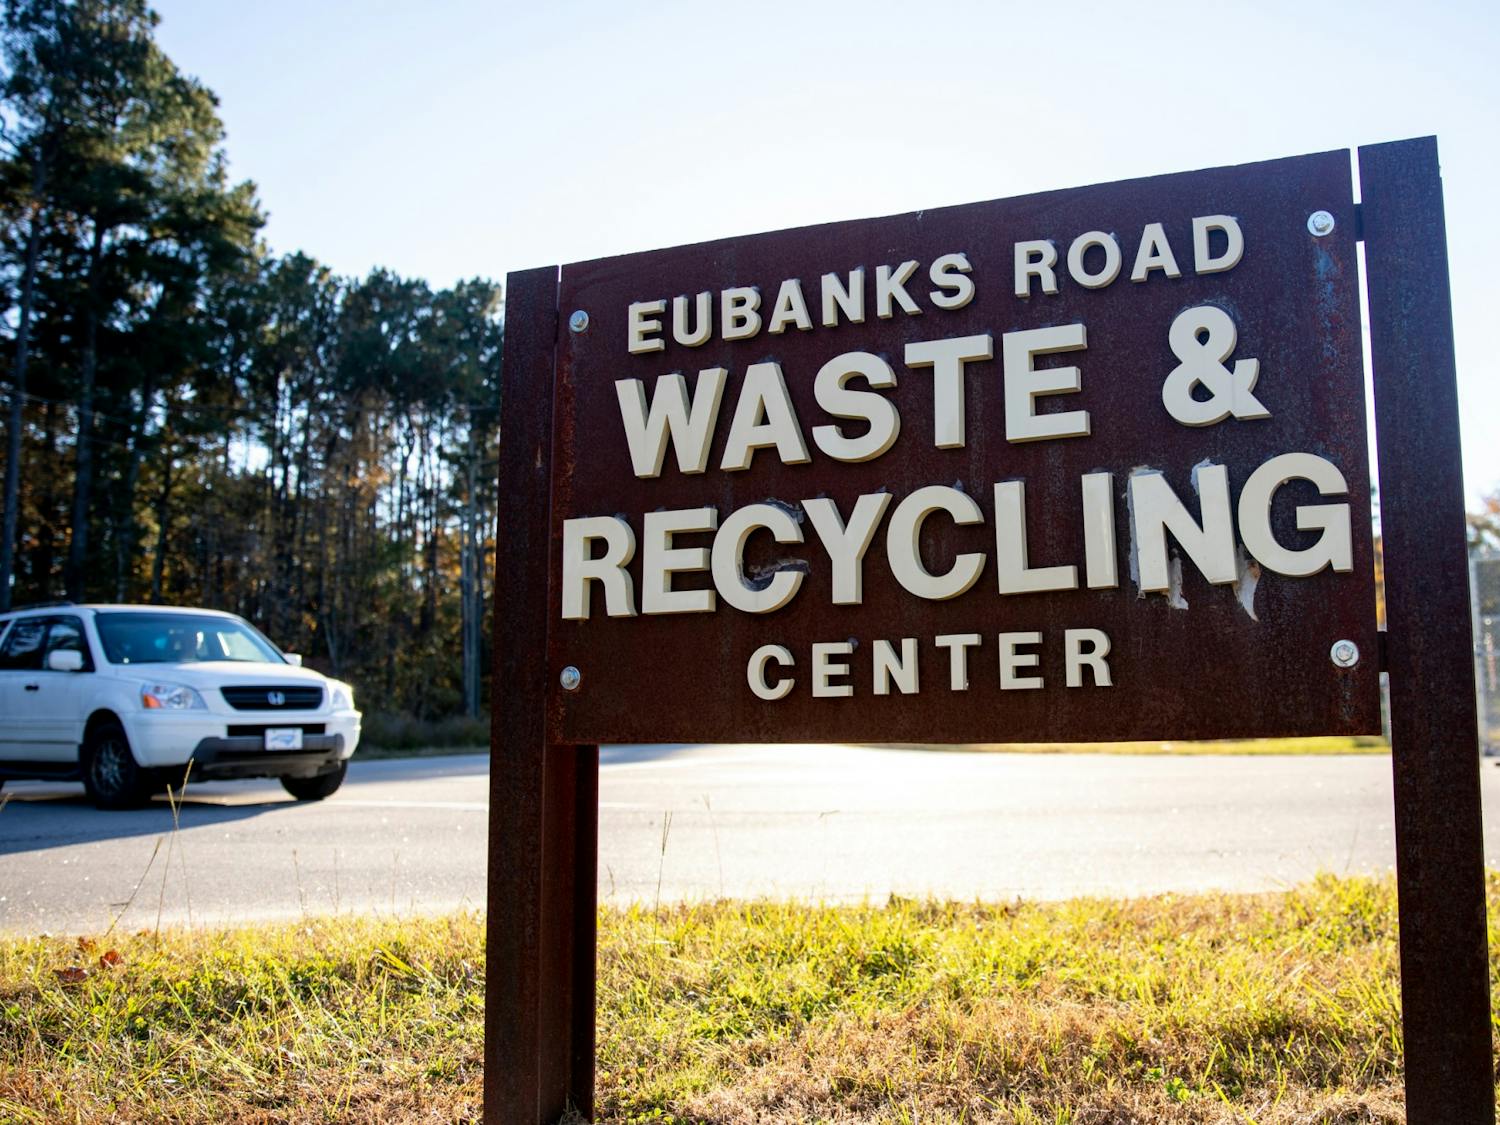 A car drives by the Orange County Eubanks Road Waste and Recycling Center on Nov. 14. The waste drop-off site hosts several composting bins as part of the Town of Chapel Hill's composting program.